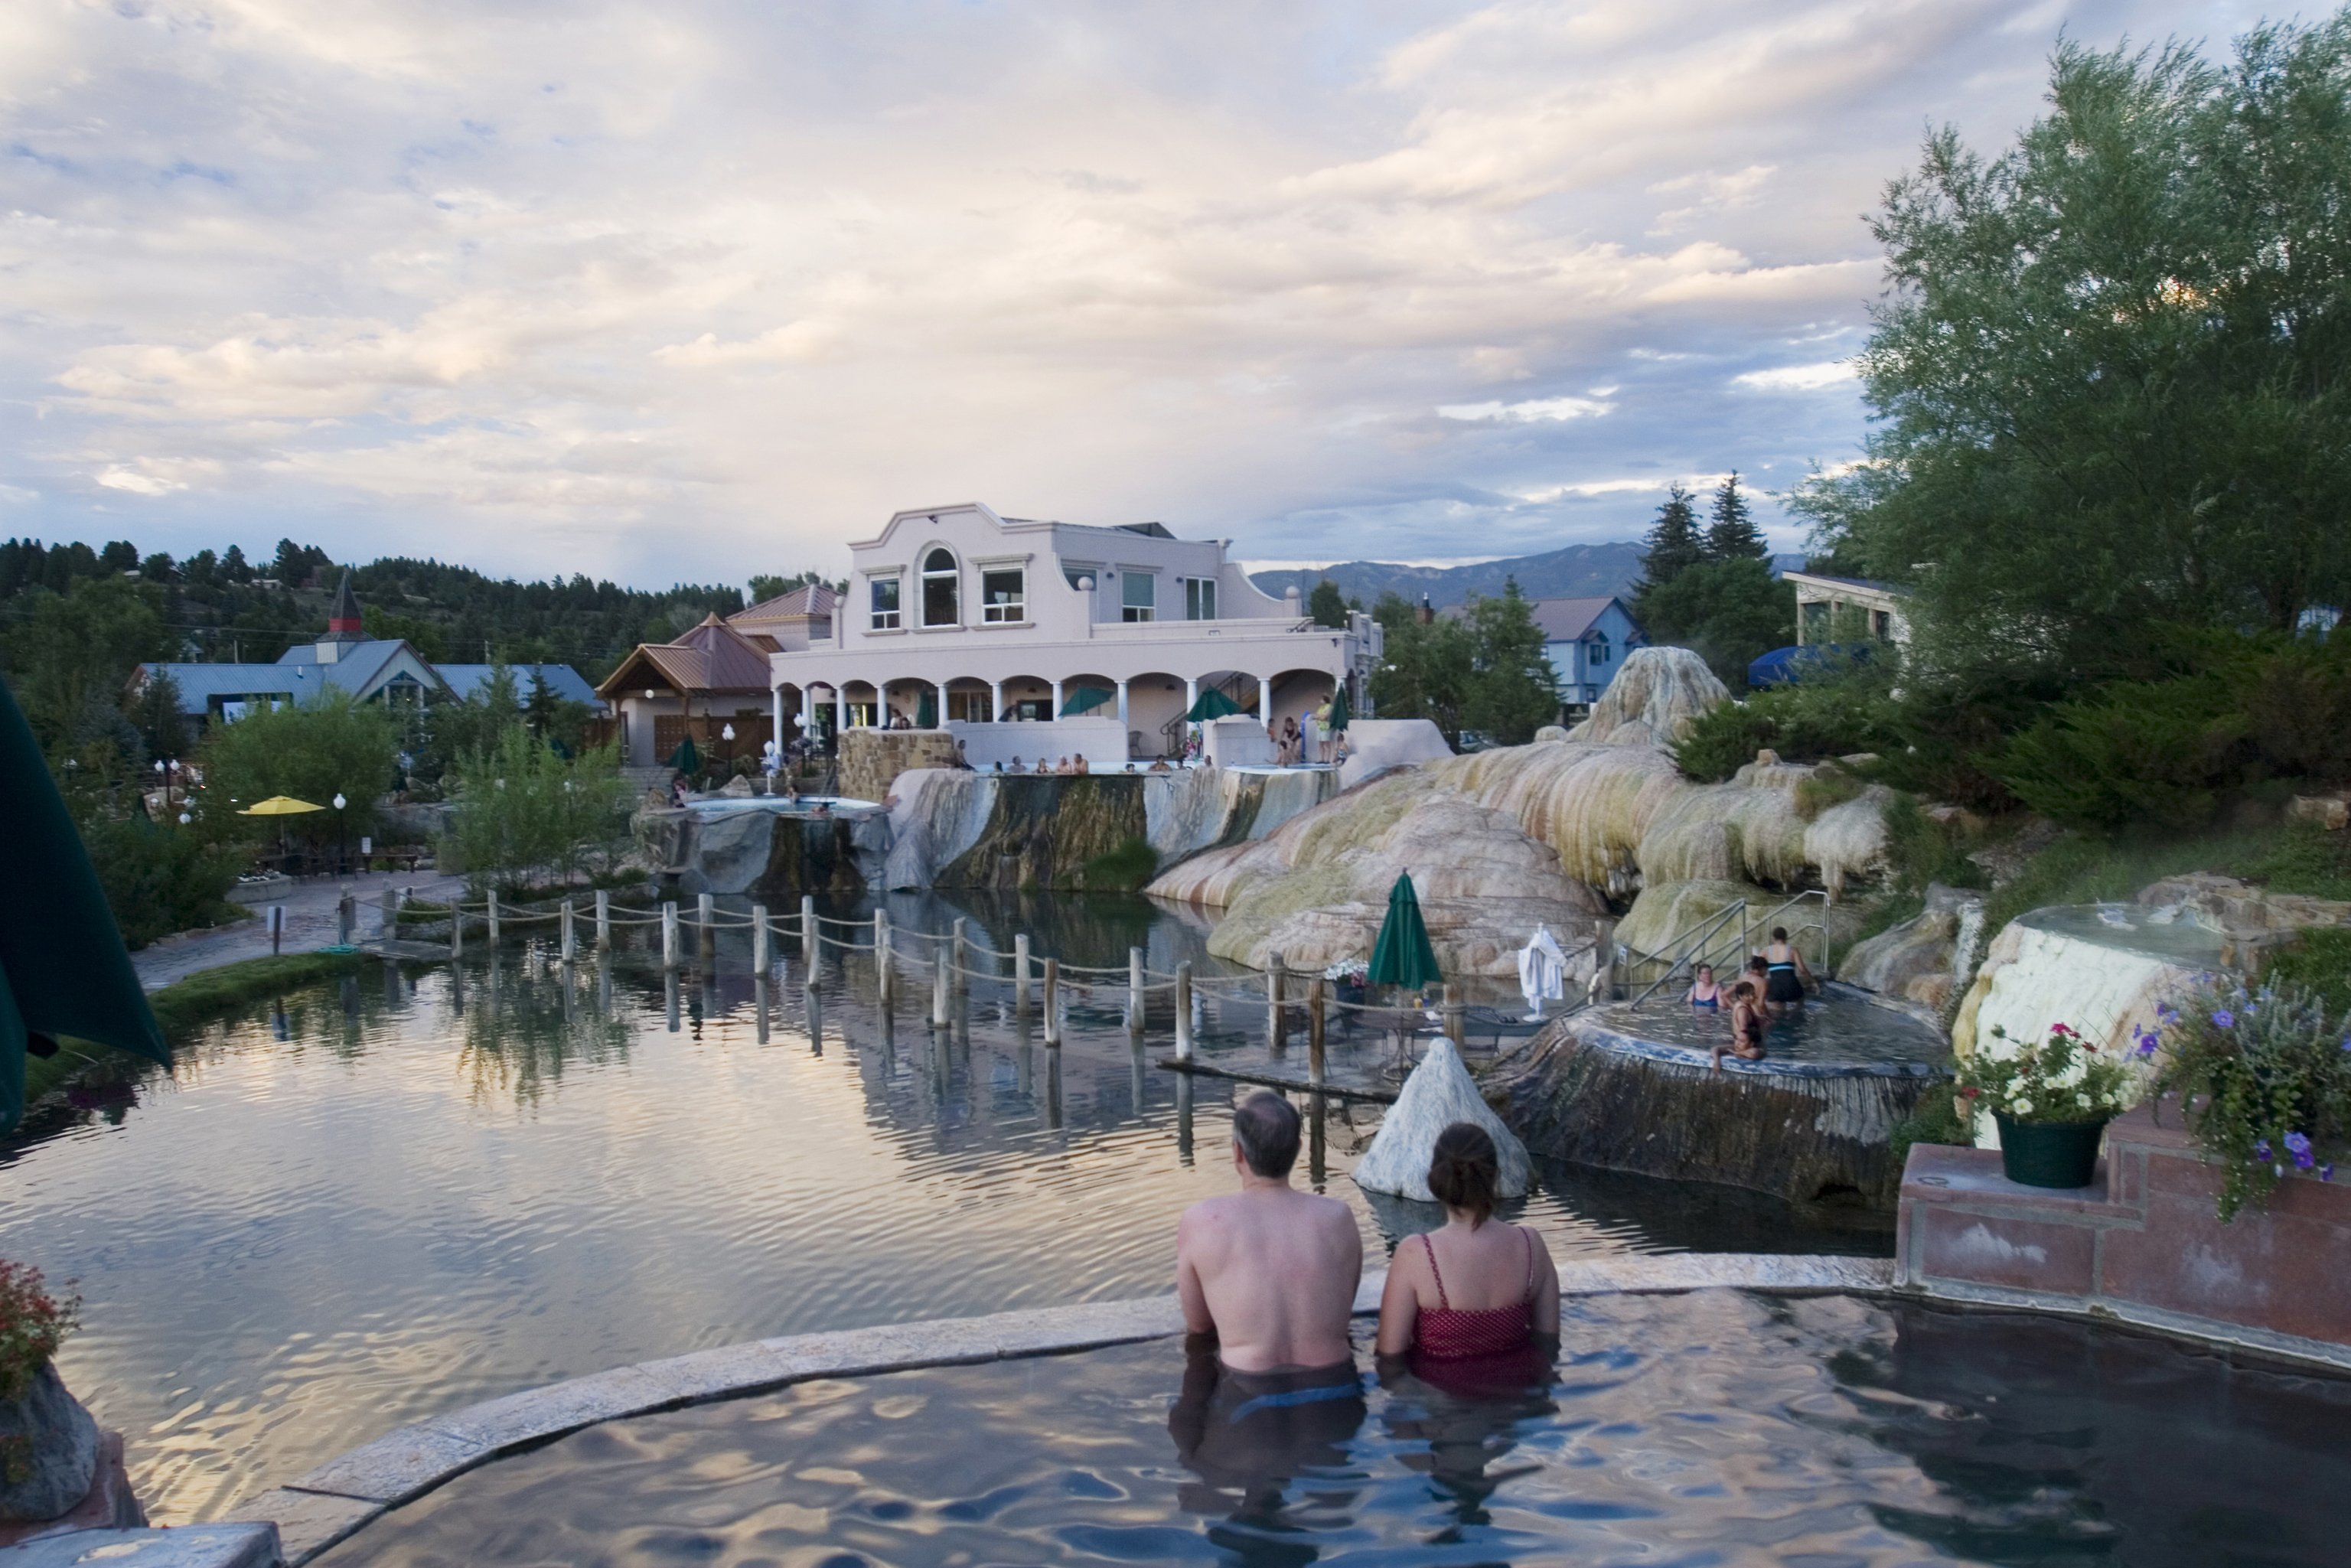 Hot spring soakers relax at the Springs Resort in Pagosa Springs